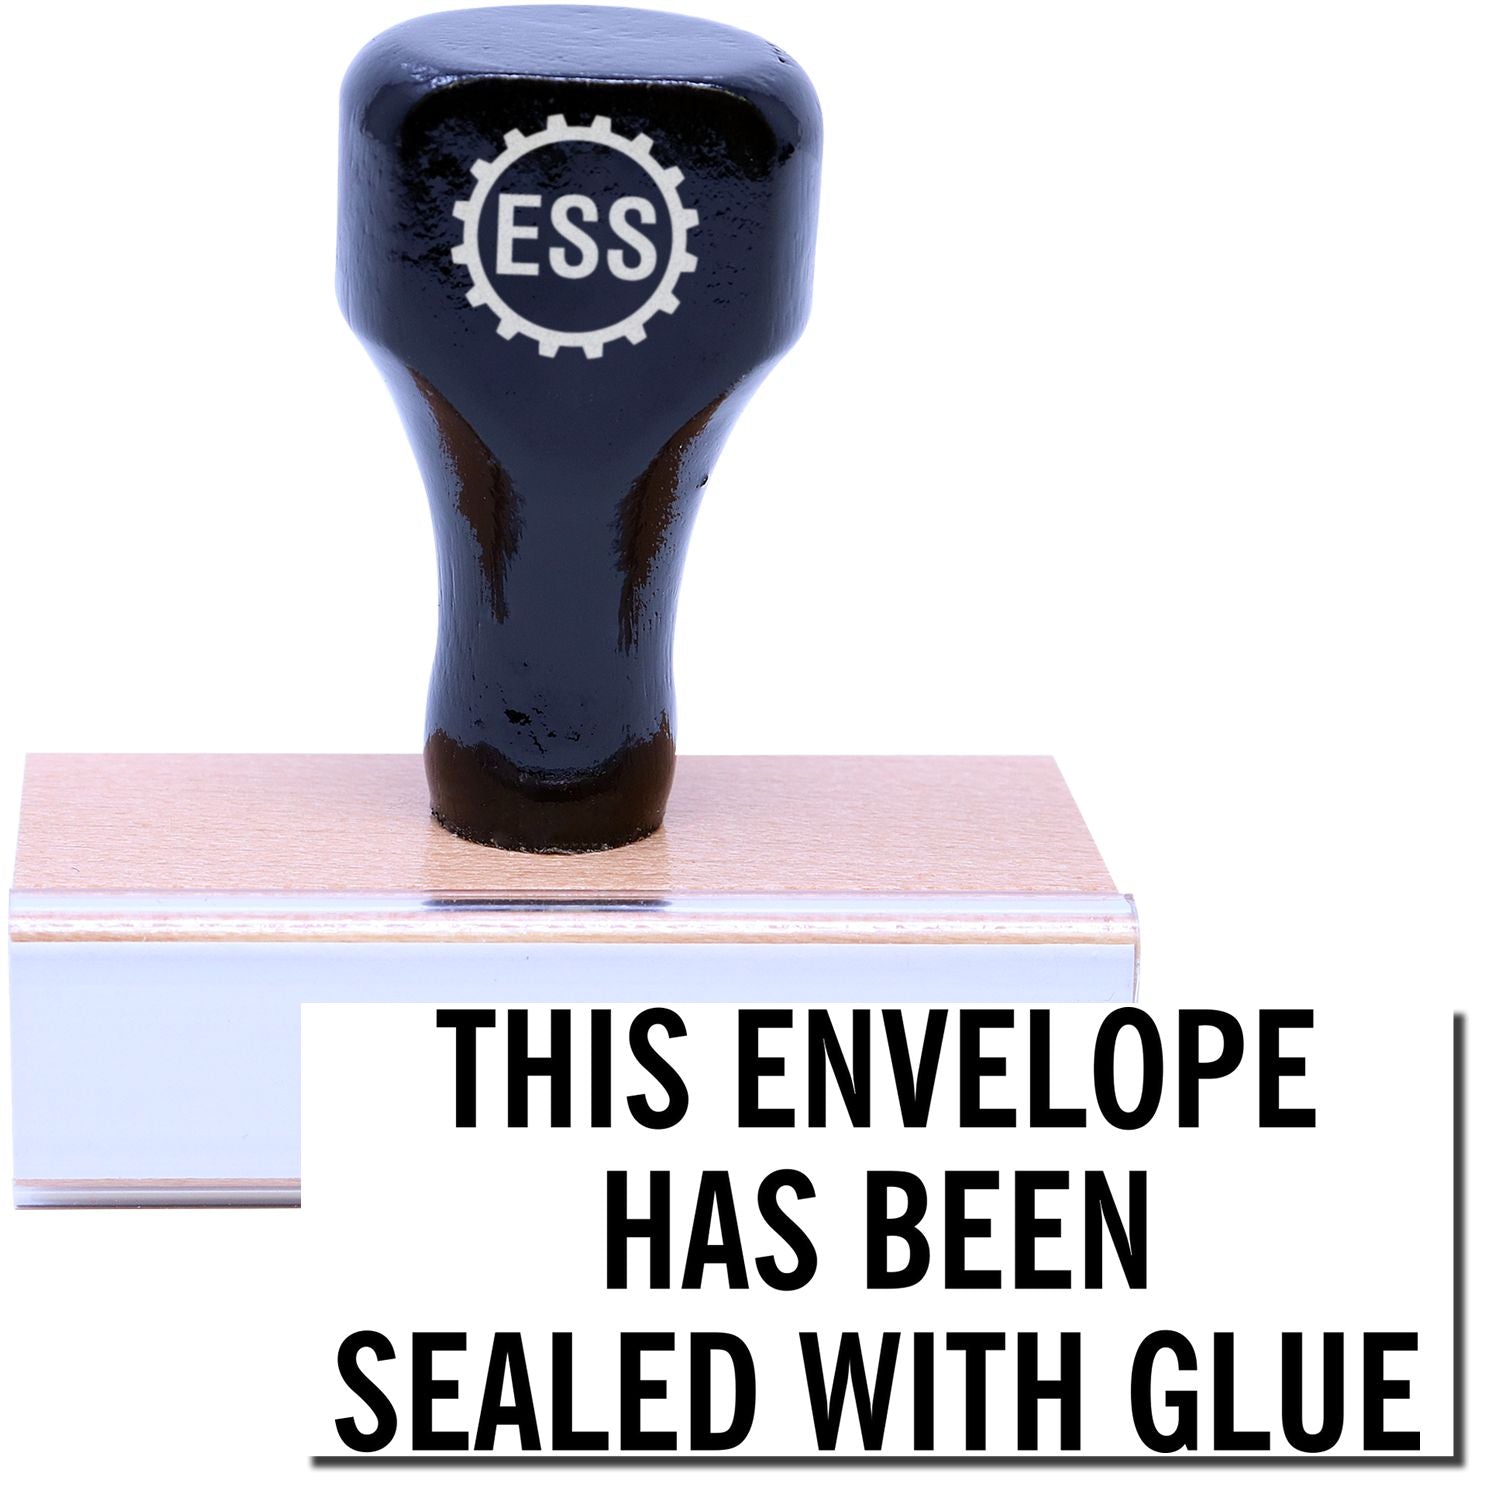 A stock office rubber stamp with a stamped image showing how the text "THIS ENVELOPE HAS BEEN SEALED WITH GLUE" in a large font is displayed after stamping.